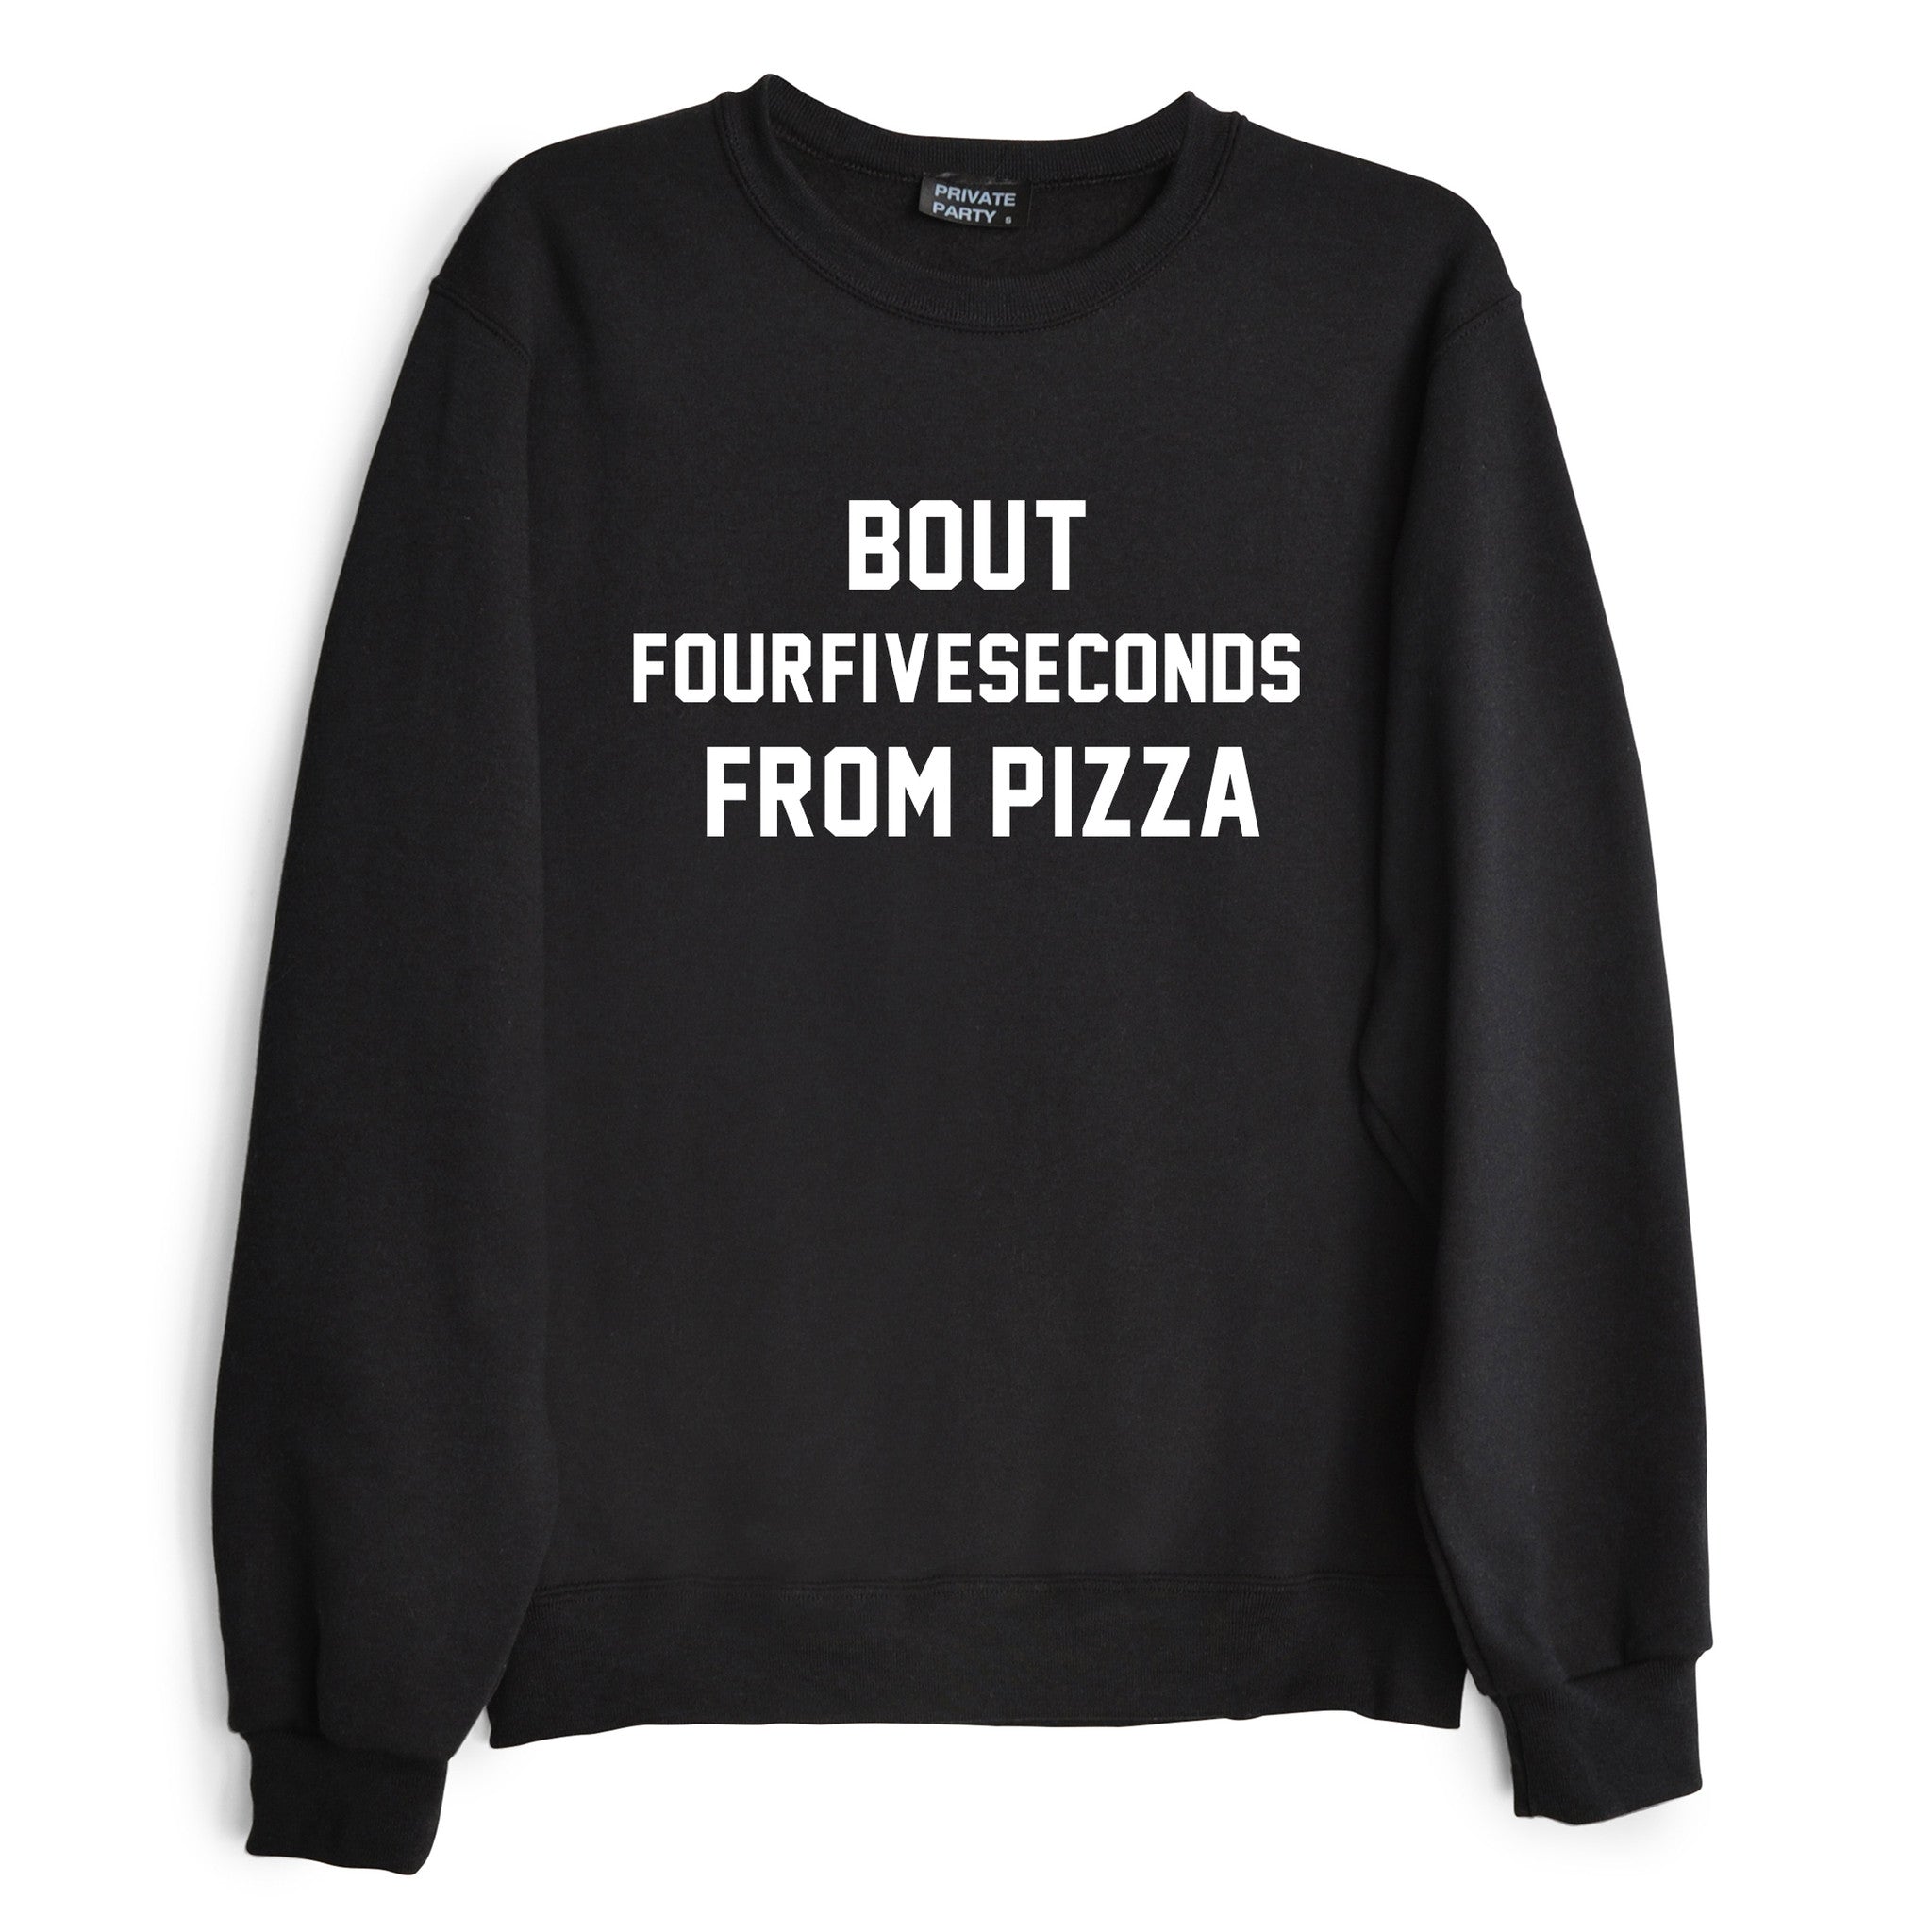 BOUT FOURFIVESECONDS FROM PIZZA [SWEATSHIRT]